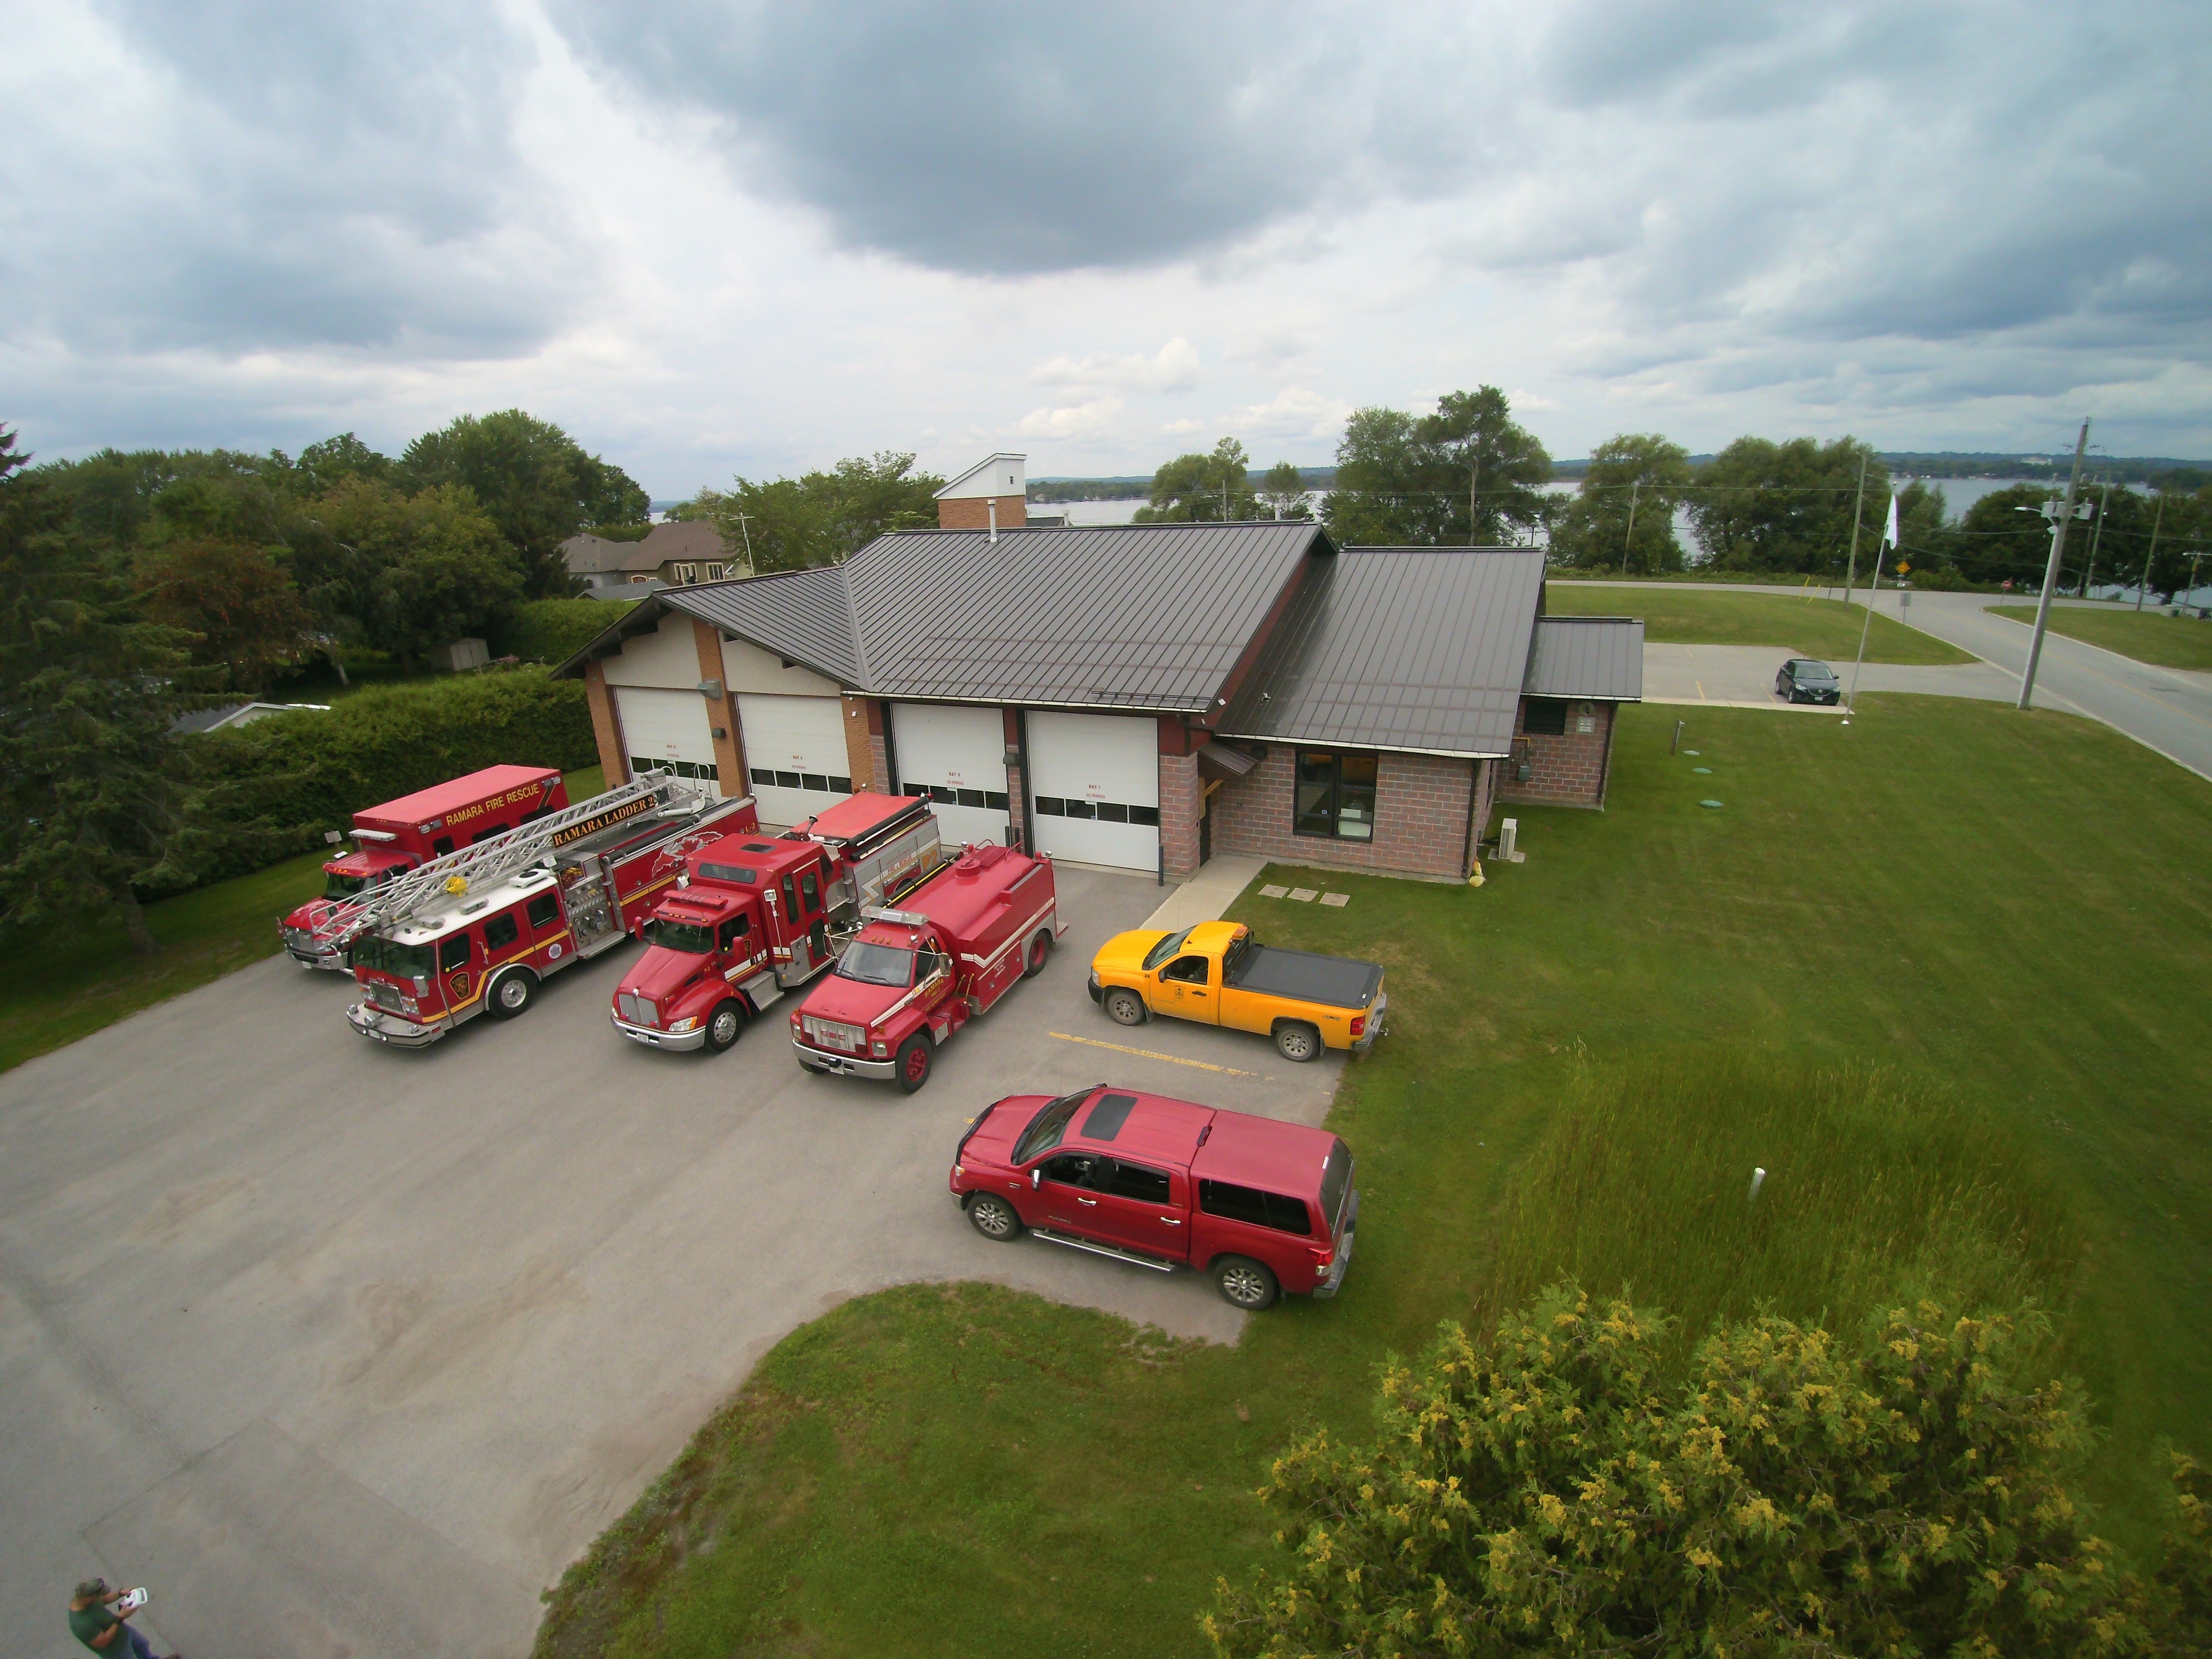 Station Two Fire Hall